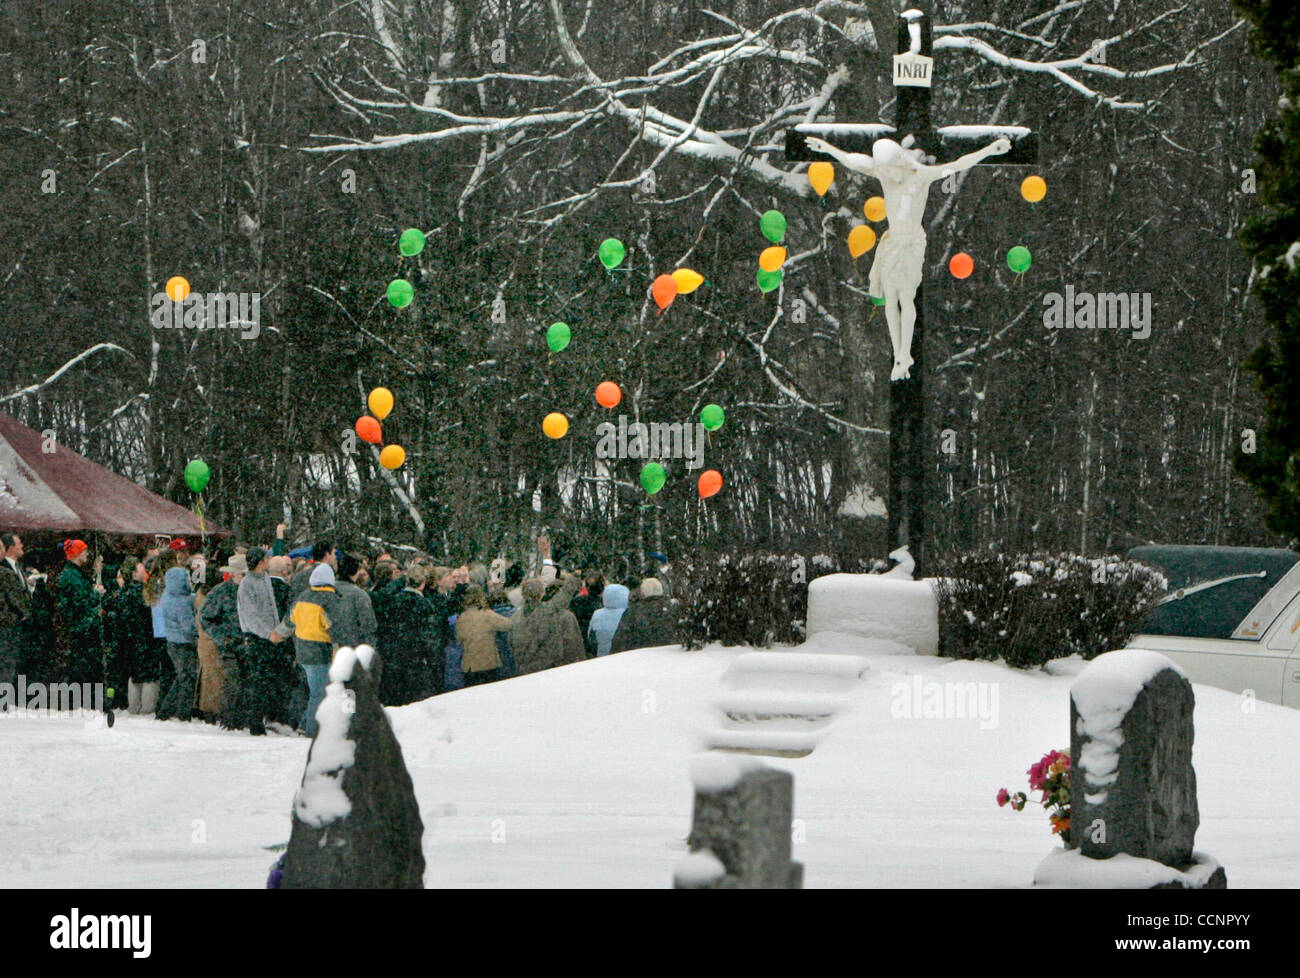 Jim Gehrz/Minneapolis Star Tribune Haugen, WI/November 27, 2004/3:30 PM Mourners release balloons at the graveside service for Allan Laski at the Bohemian National Cemetery in Haugen, WI, following a funeral service at Holy Trinity Catholic Church nearby. Stock Photo